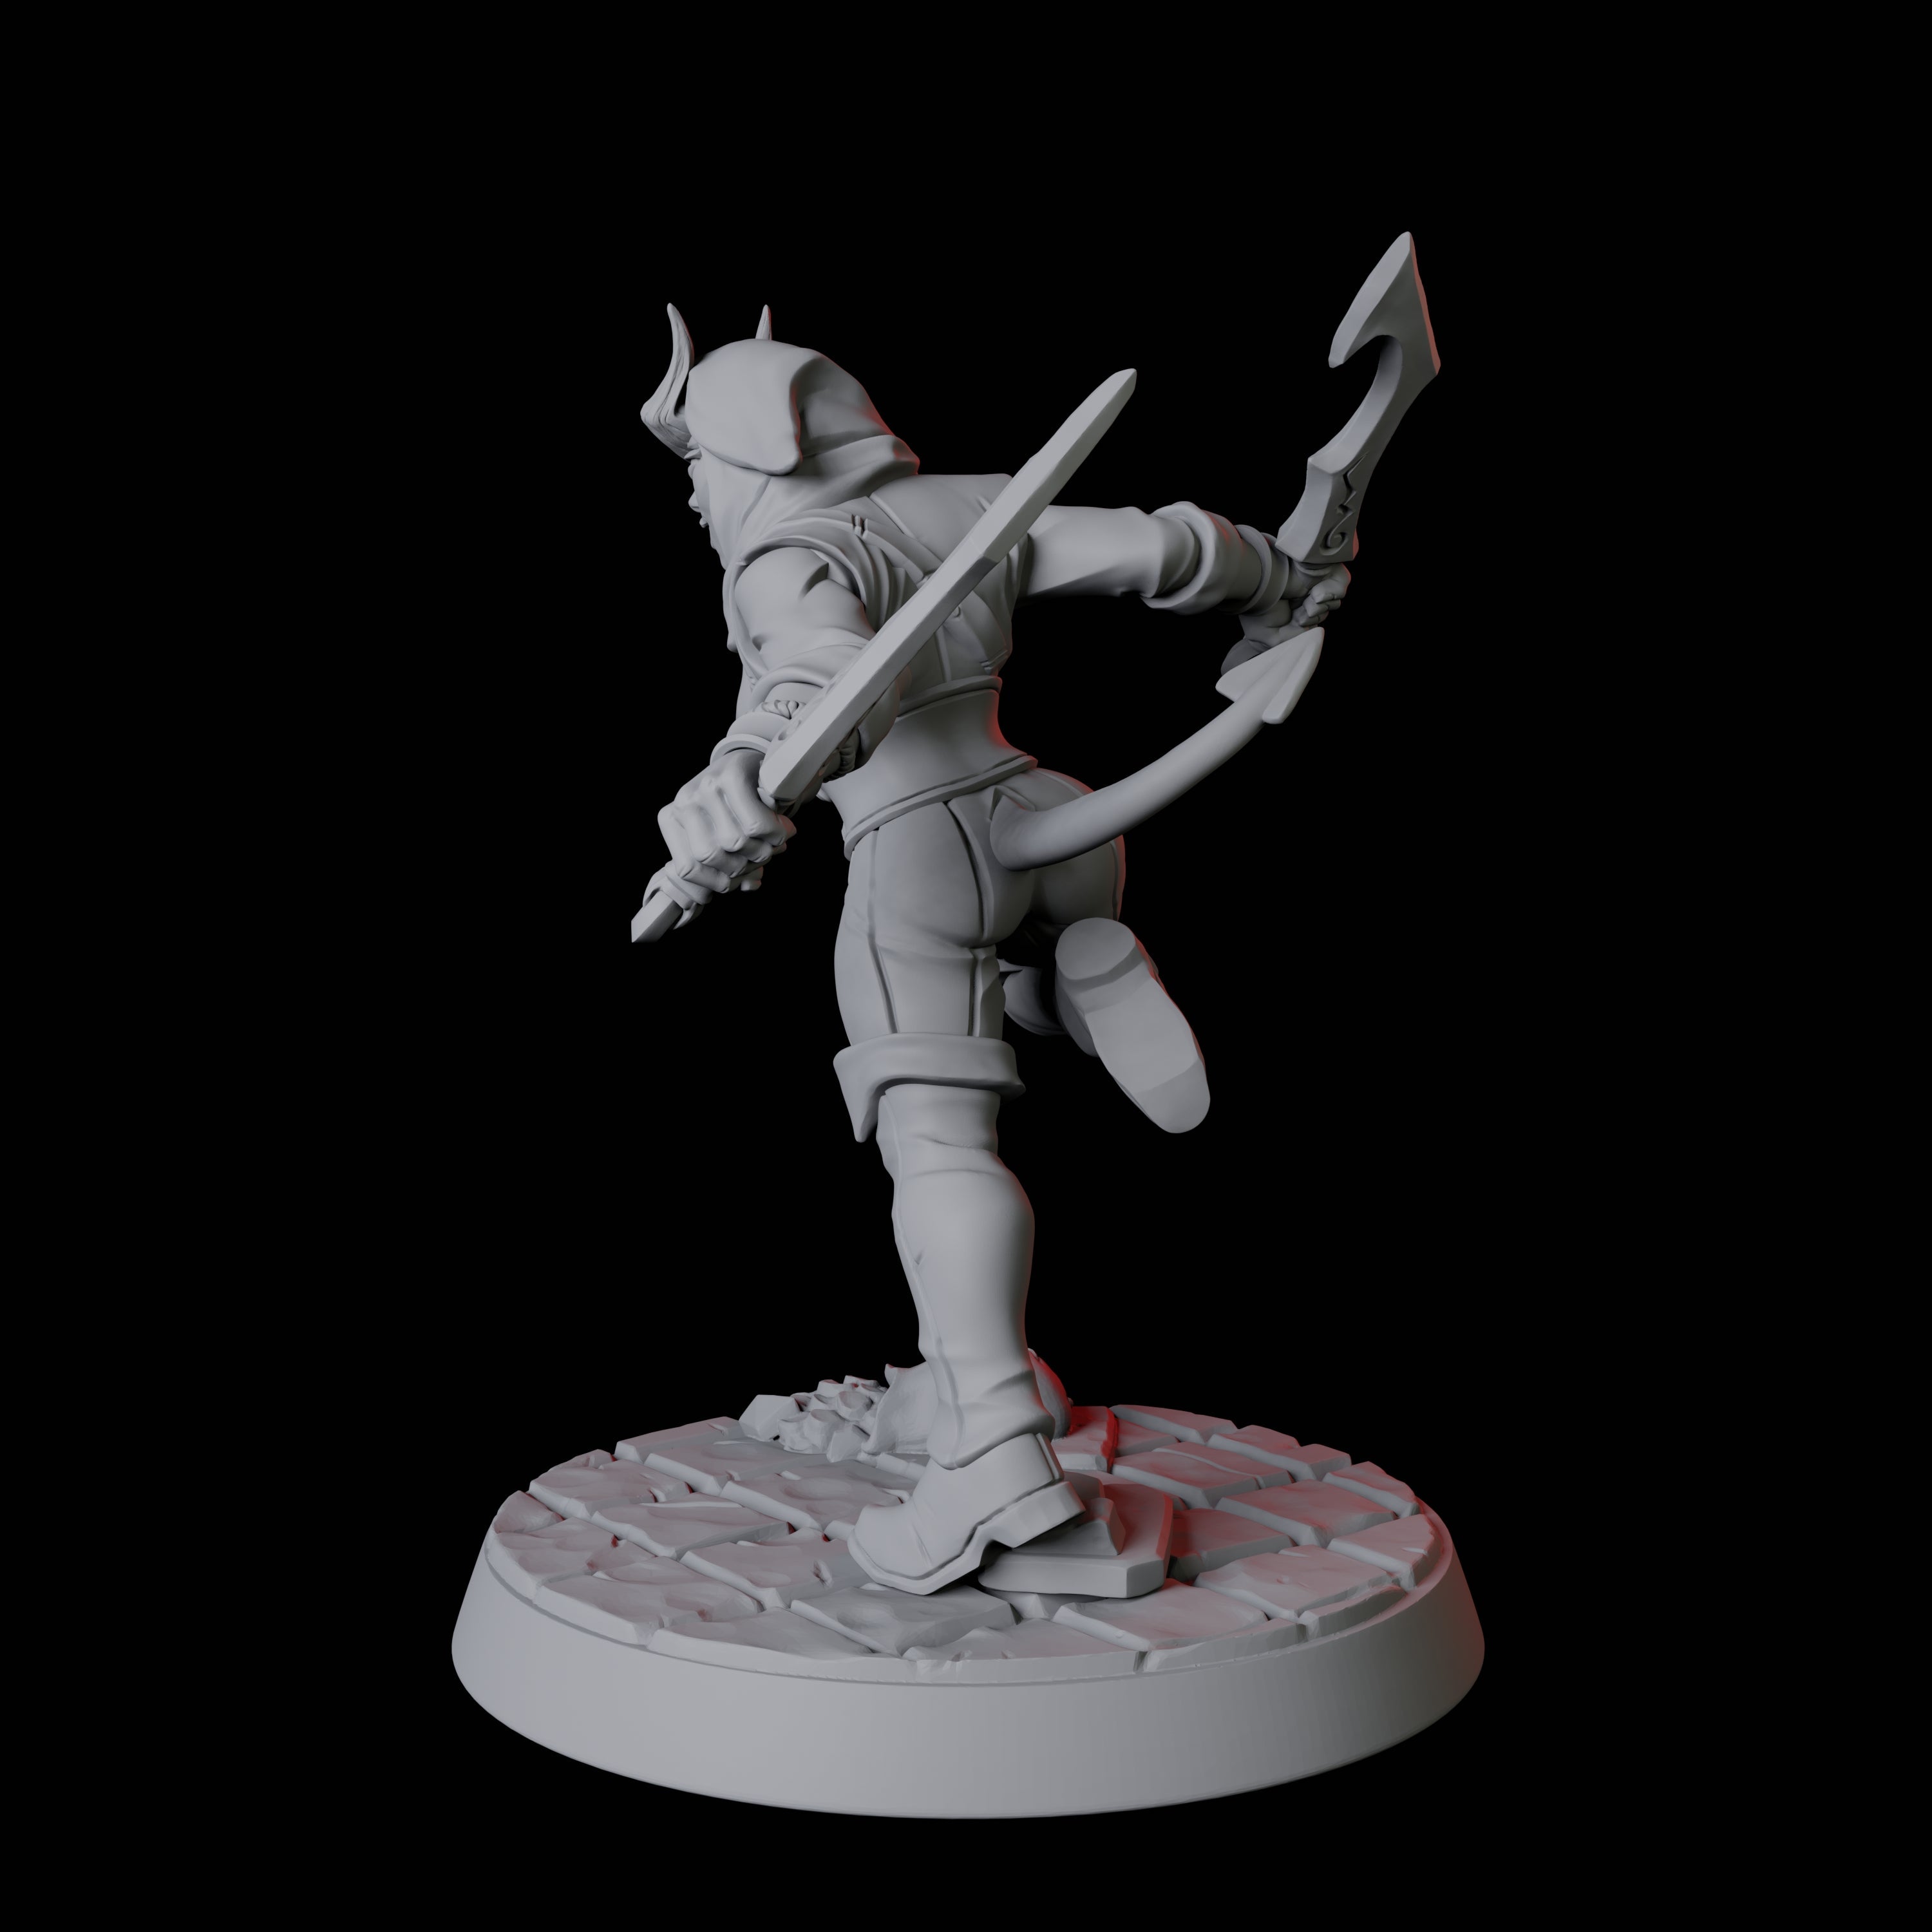 Tiefling Rogue D Miniature for Dungeons and Dragons, Pathfinder or other TTRPGs